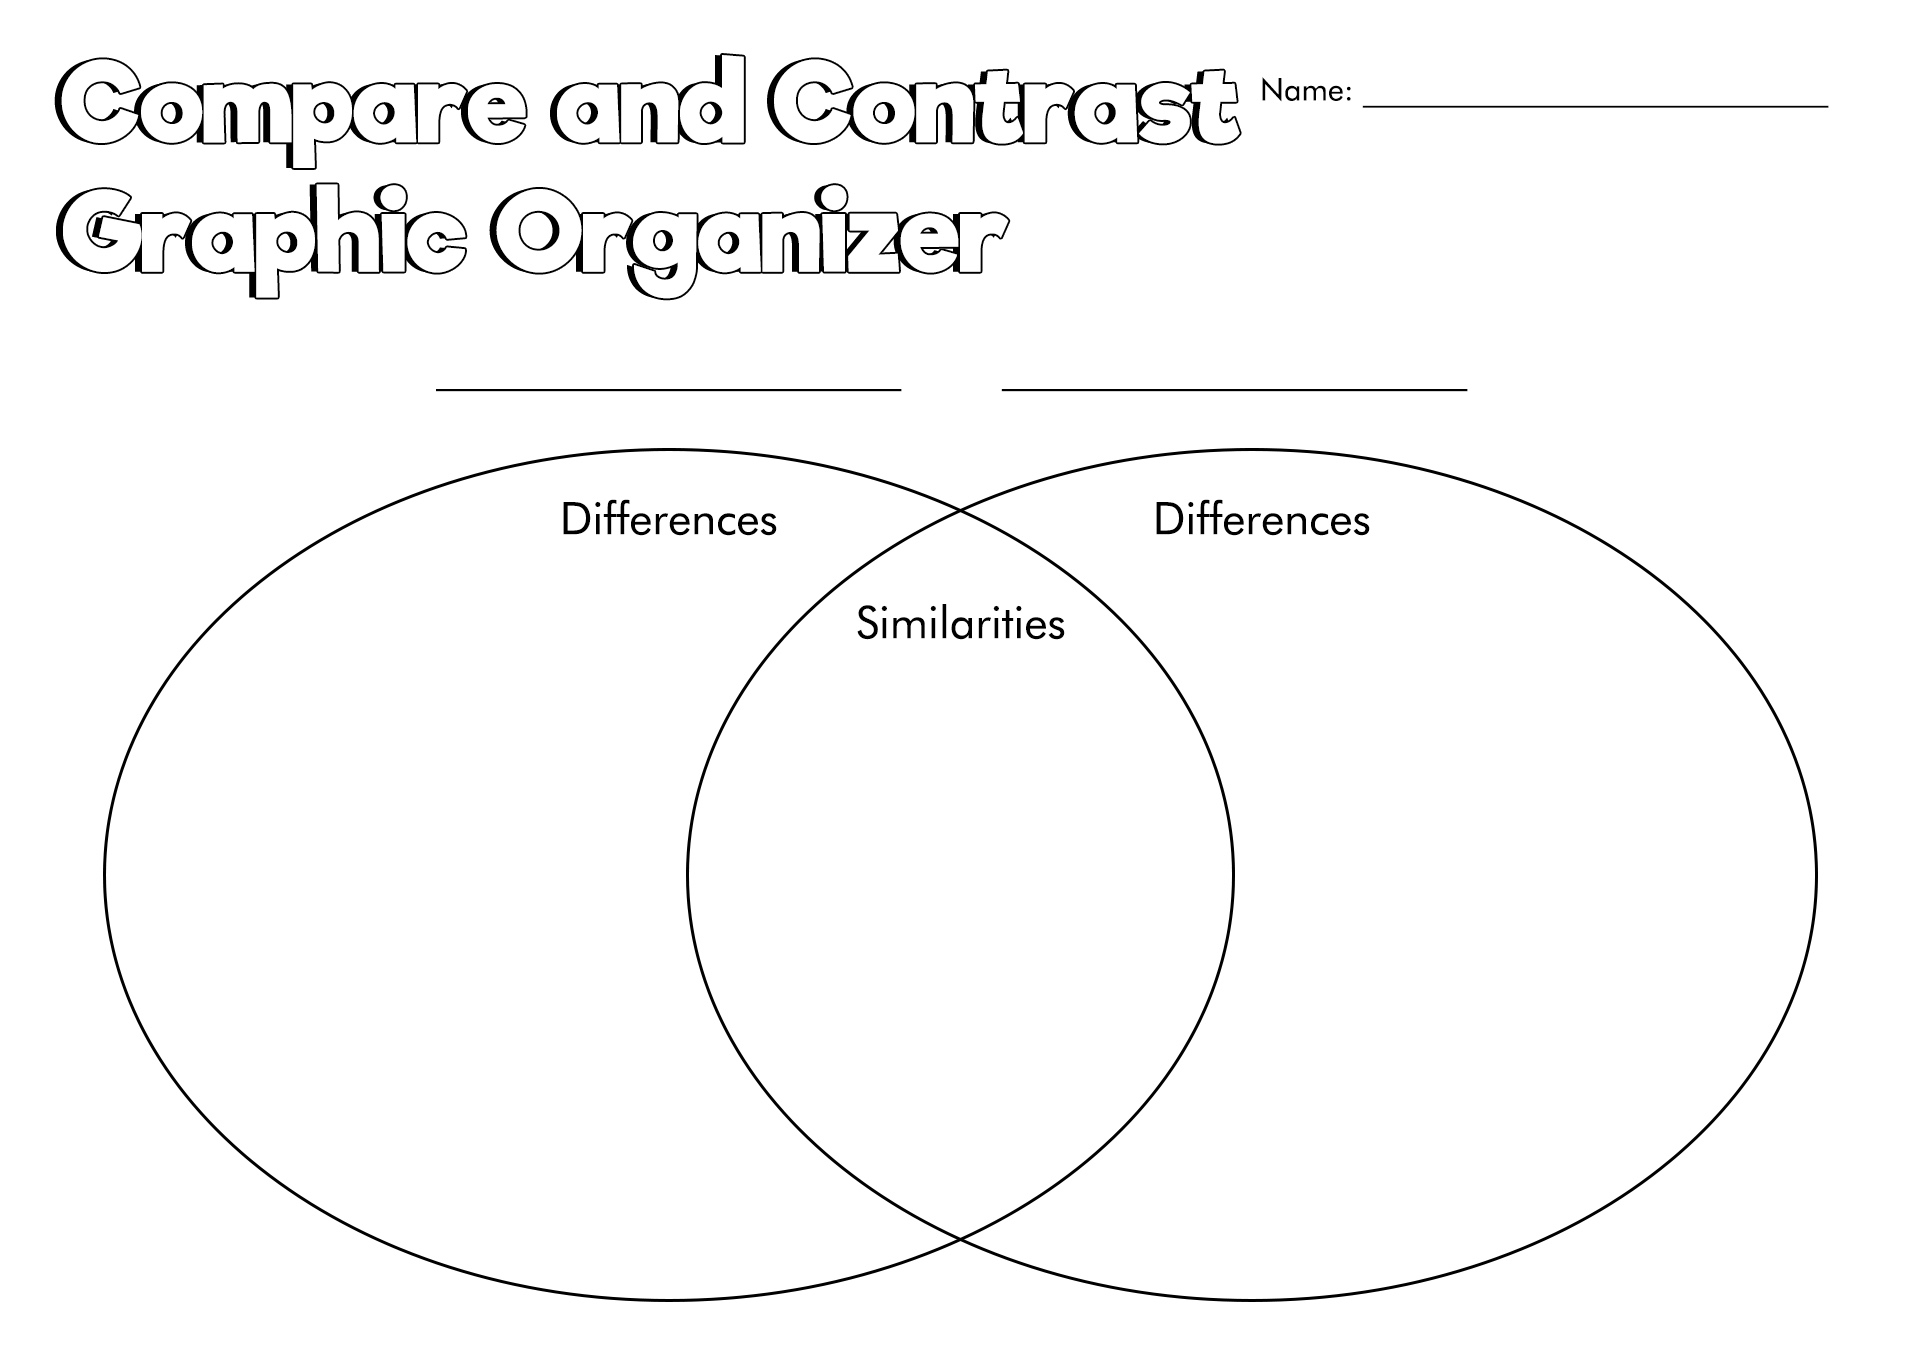 compare-and-contrast-graphic-organizers-free-templates-edraw